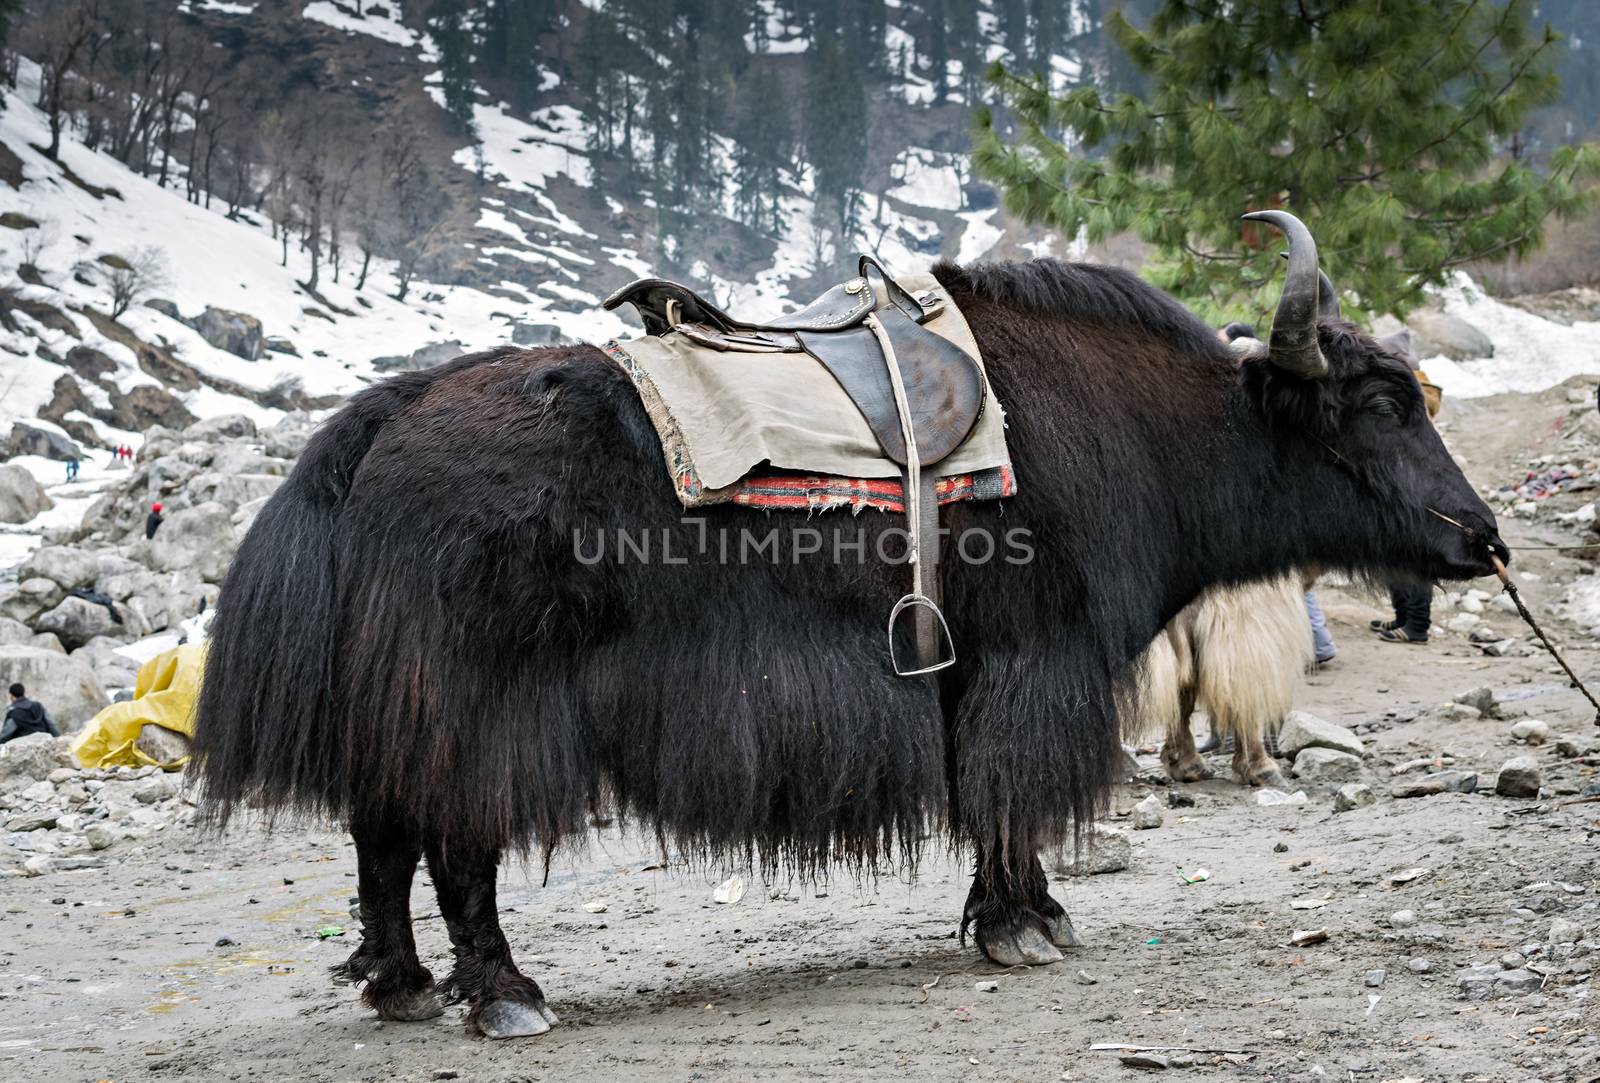 Yak ready for ride in Manali, Himachal Pradesh, India. by lalam